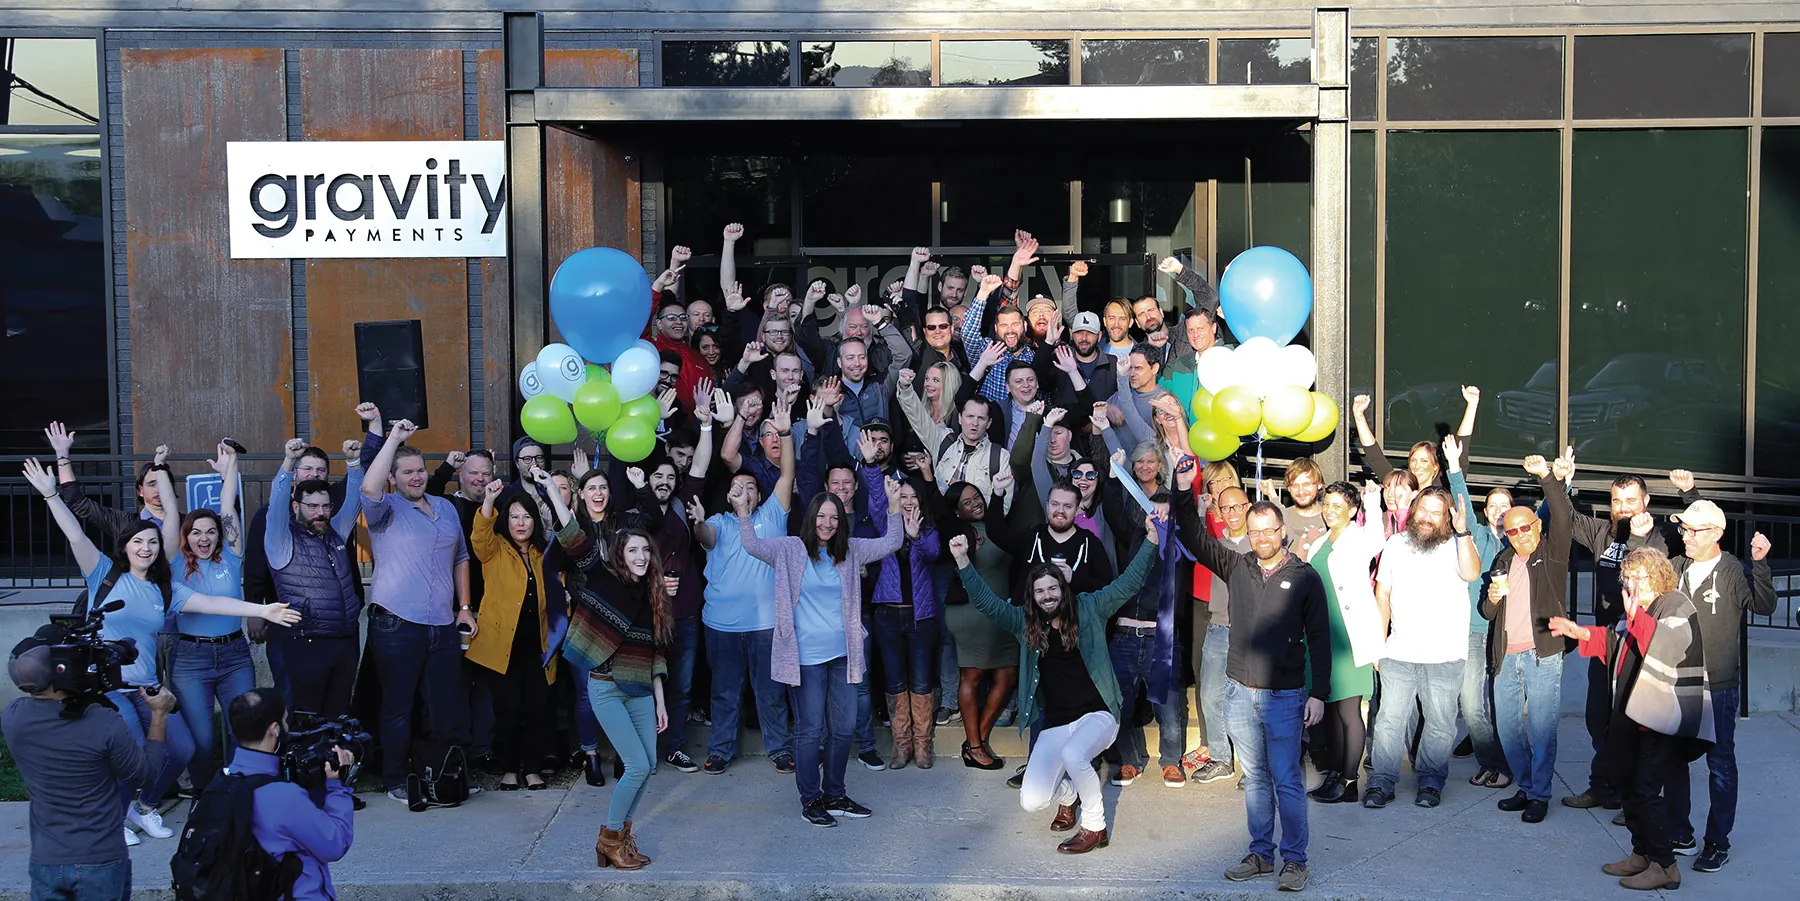 Photo of a crowd of people in front of a Gravity Payments banner.